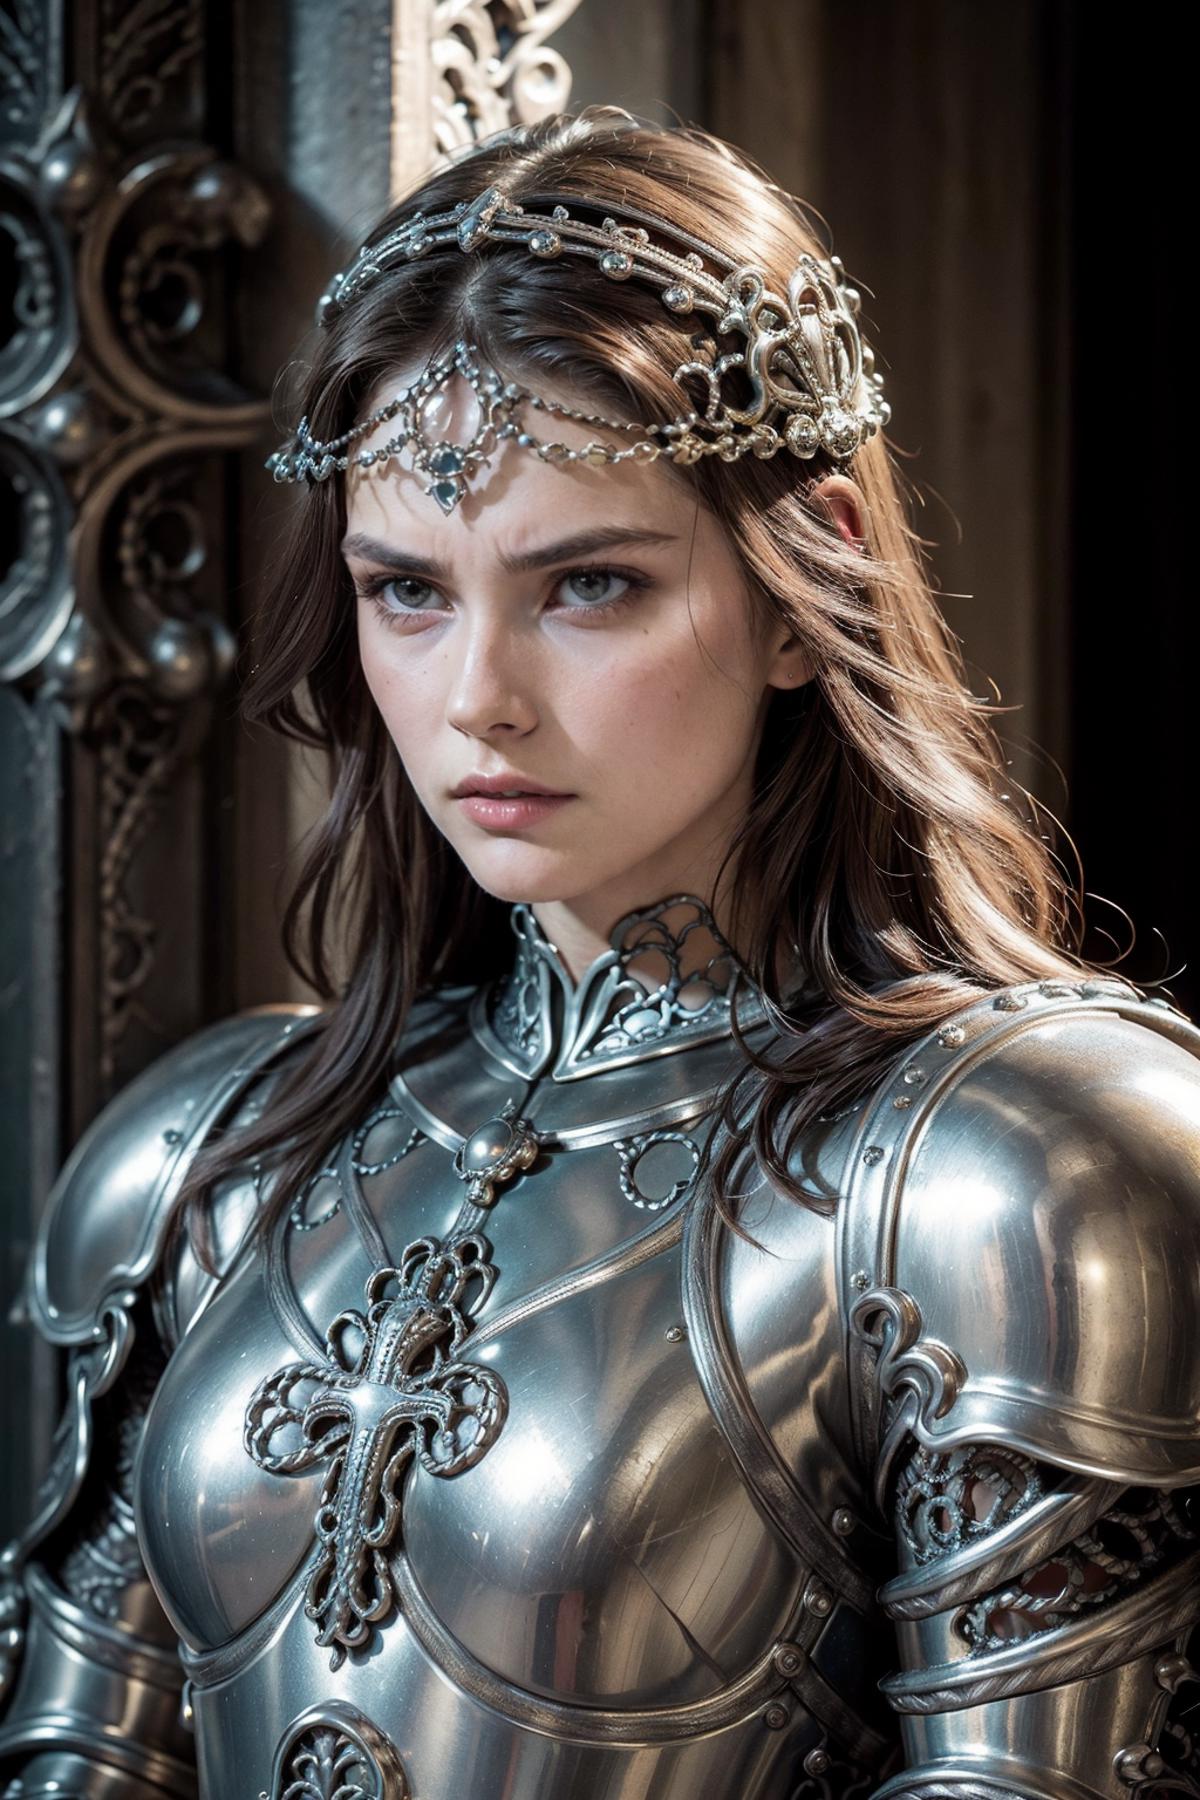 A woman wearing a silver crown and chainmail armor.